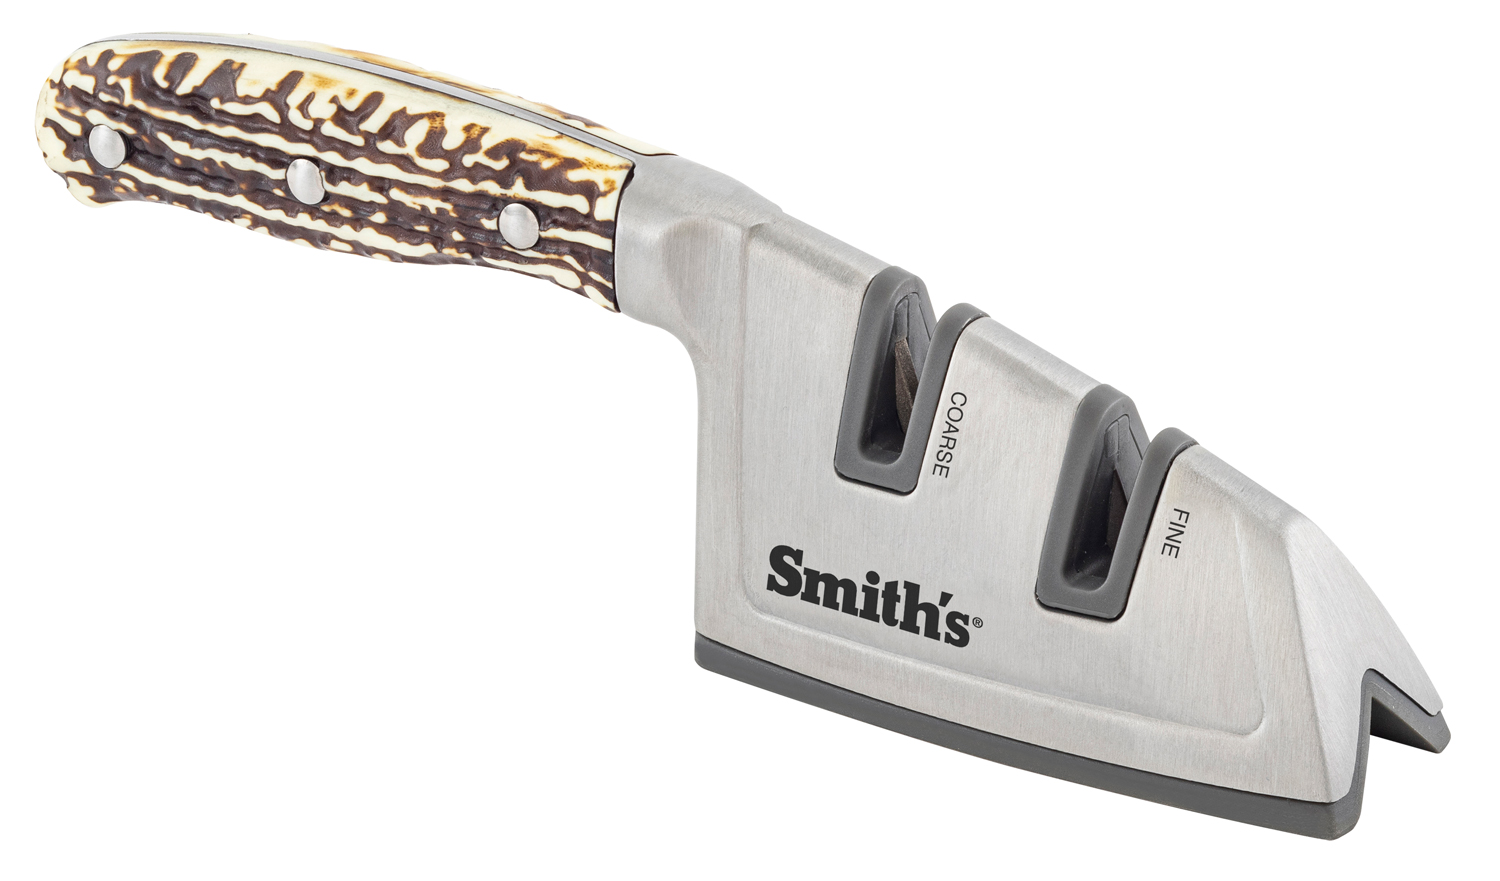 https://op2.0ps.us/original/opplanet-smiths-consumer-products-cabin-lodge-diamond-edge-grip-sharpener-stag-51115-main